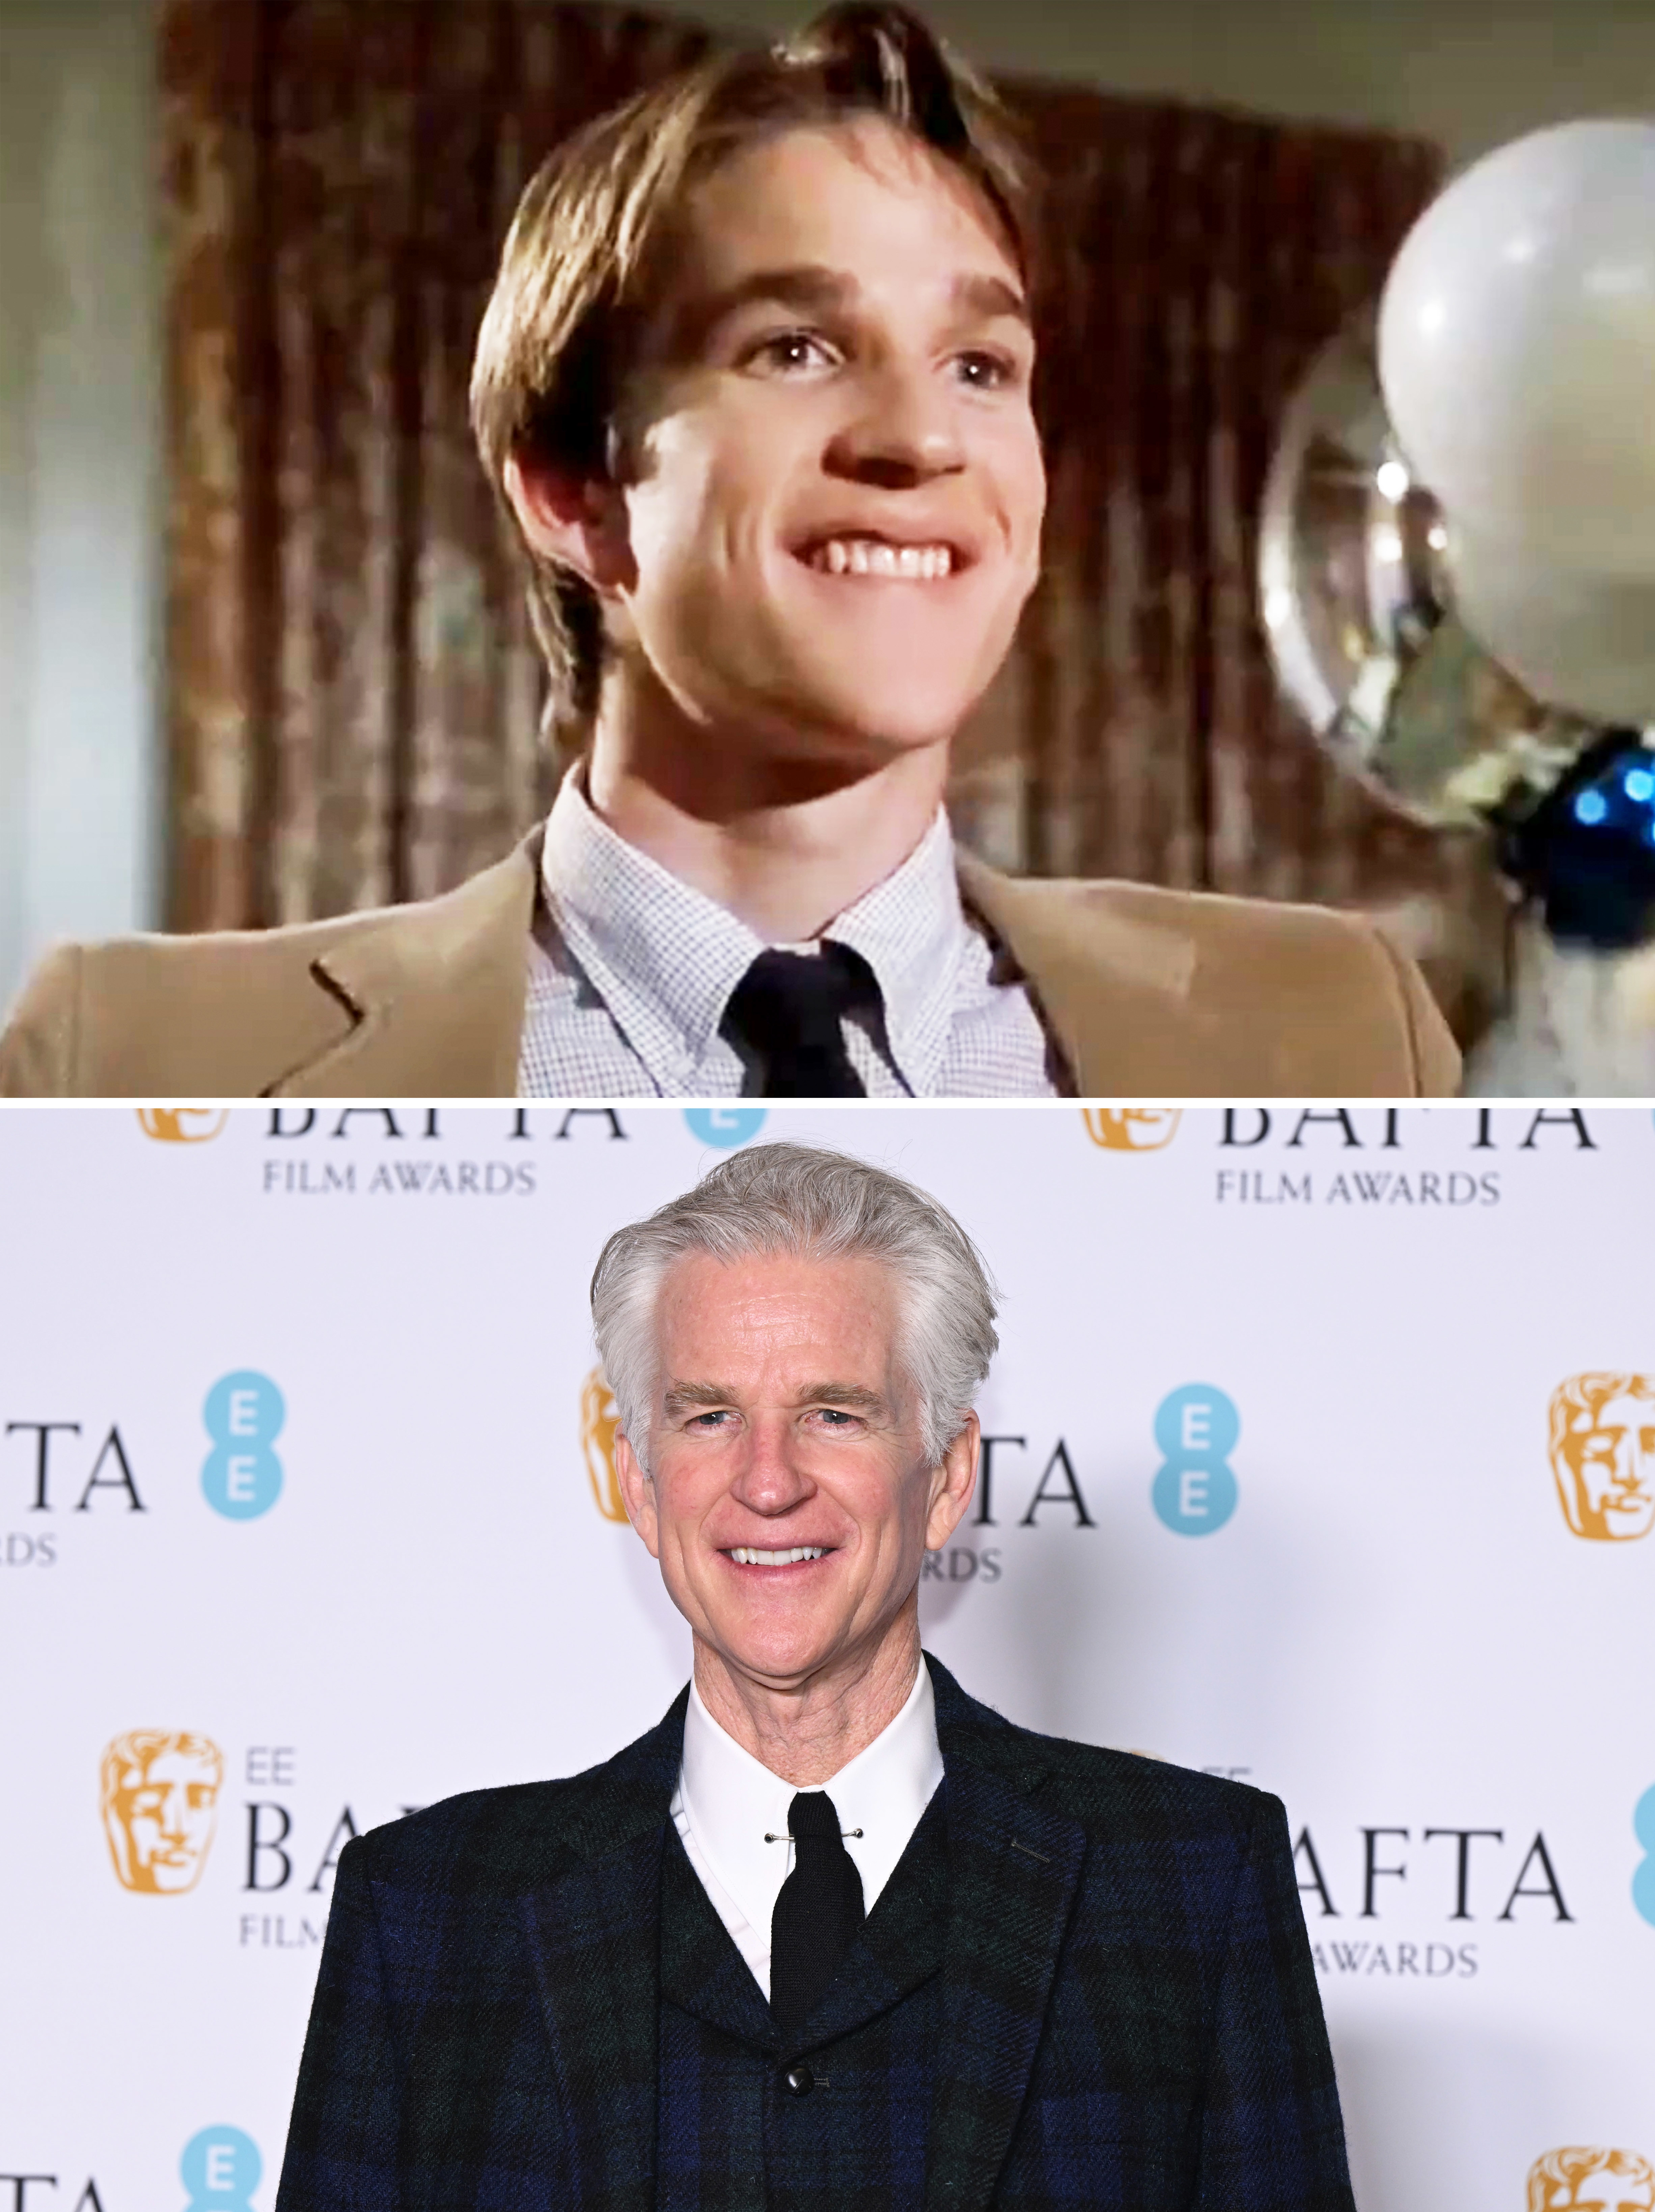 Matthew in a scene from the movie and in a close-up at a media event